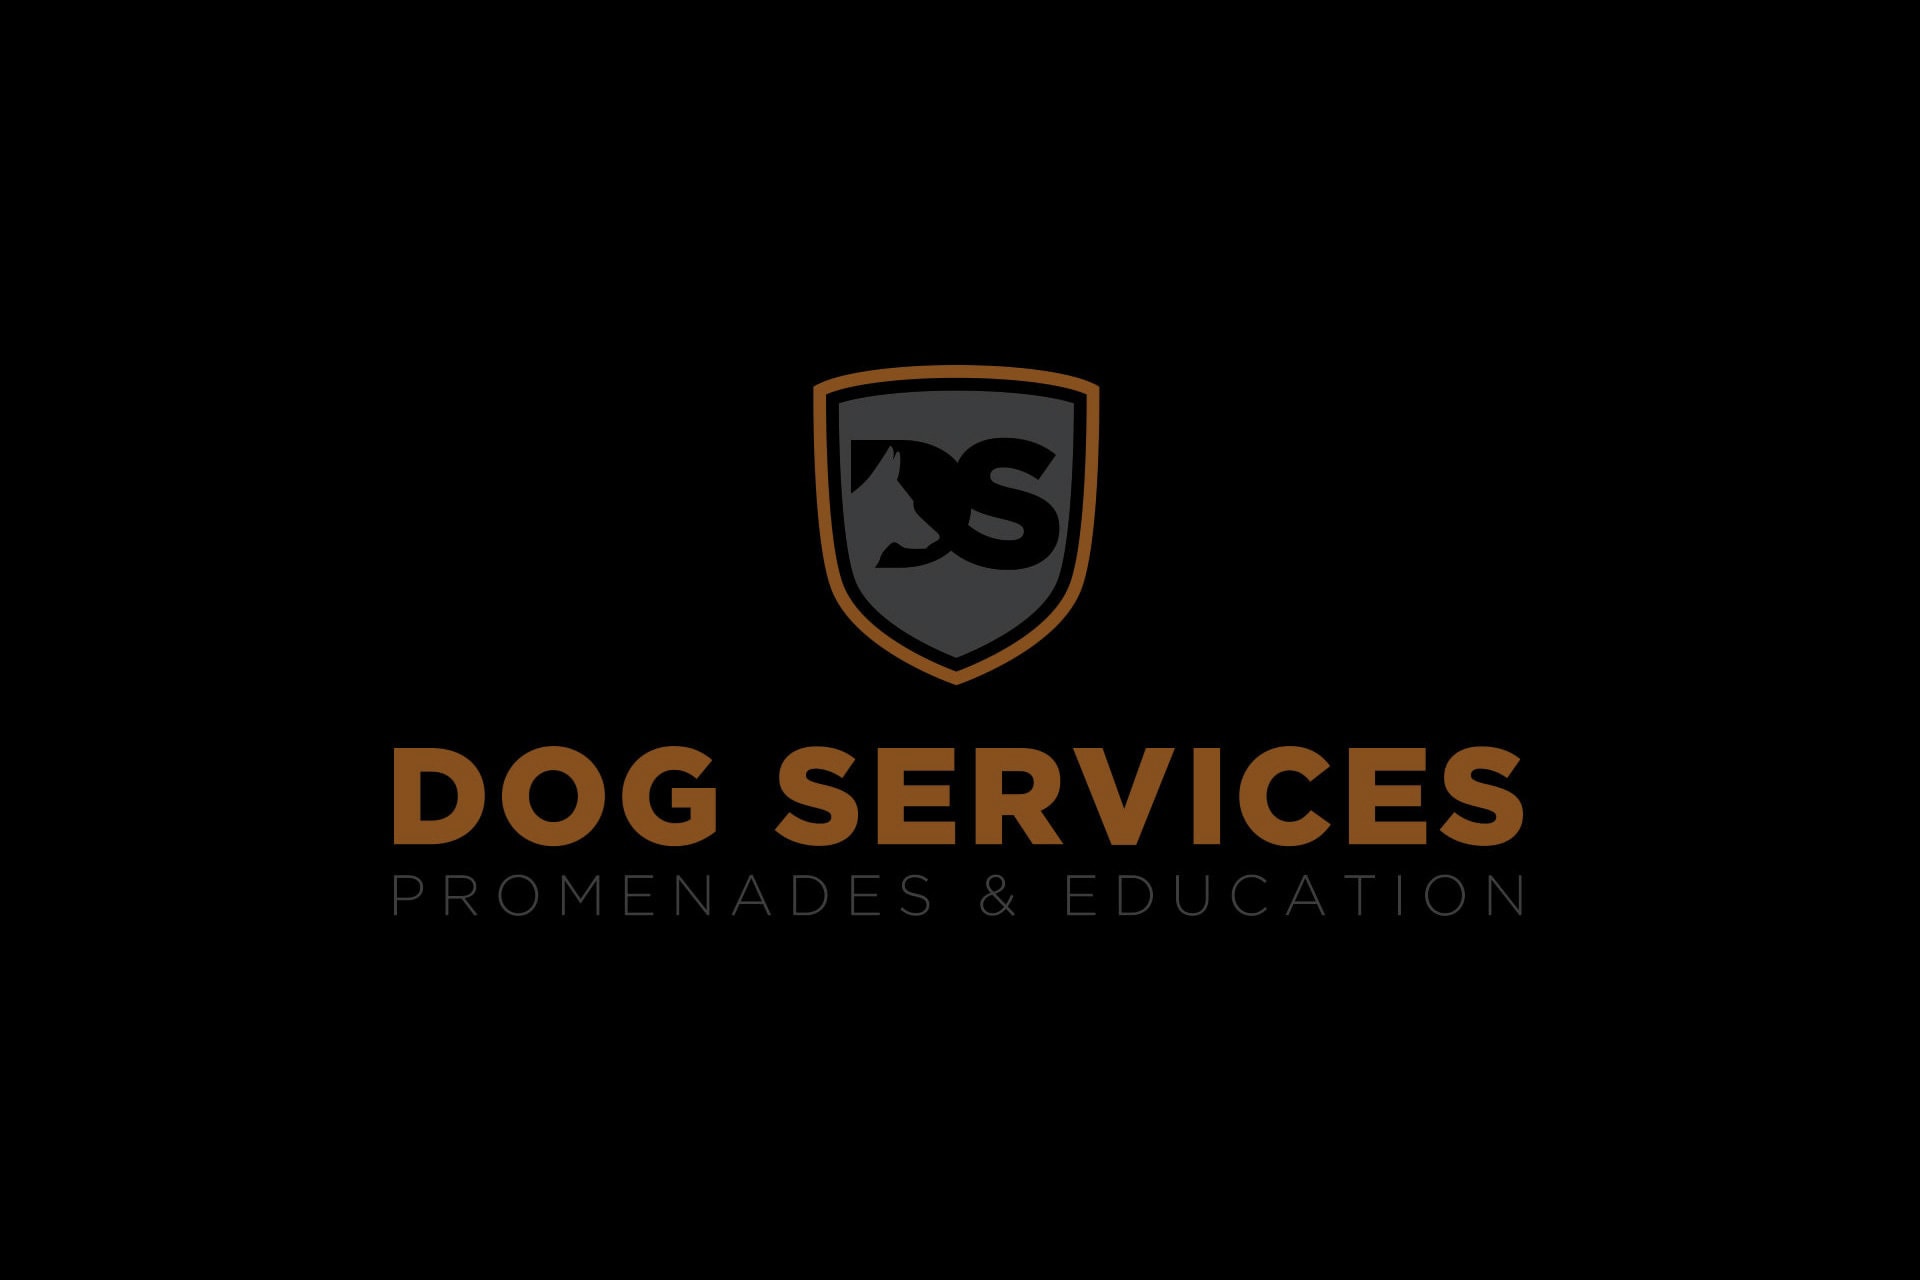 Dog Services